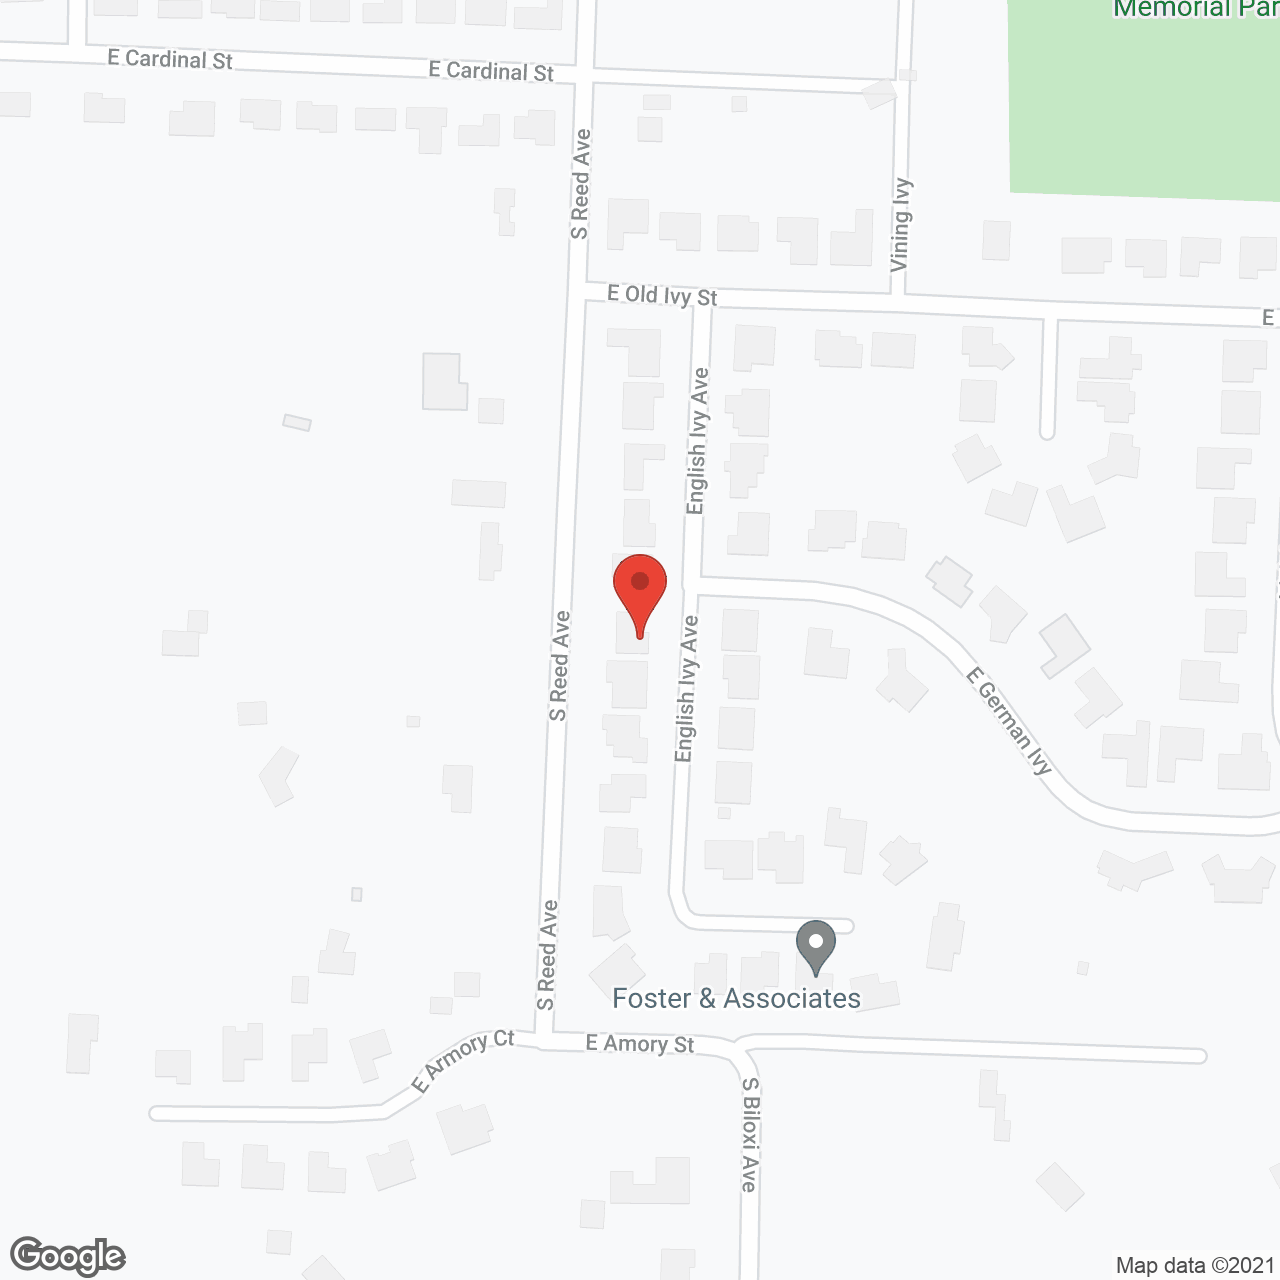 Heart To Heart Senior Care in google map